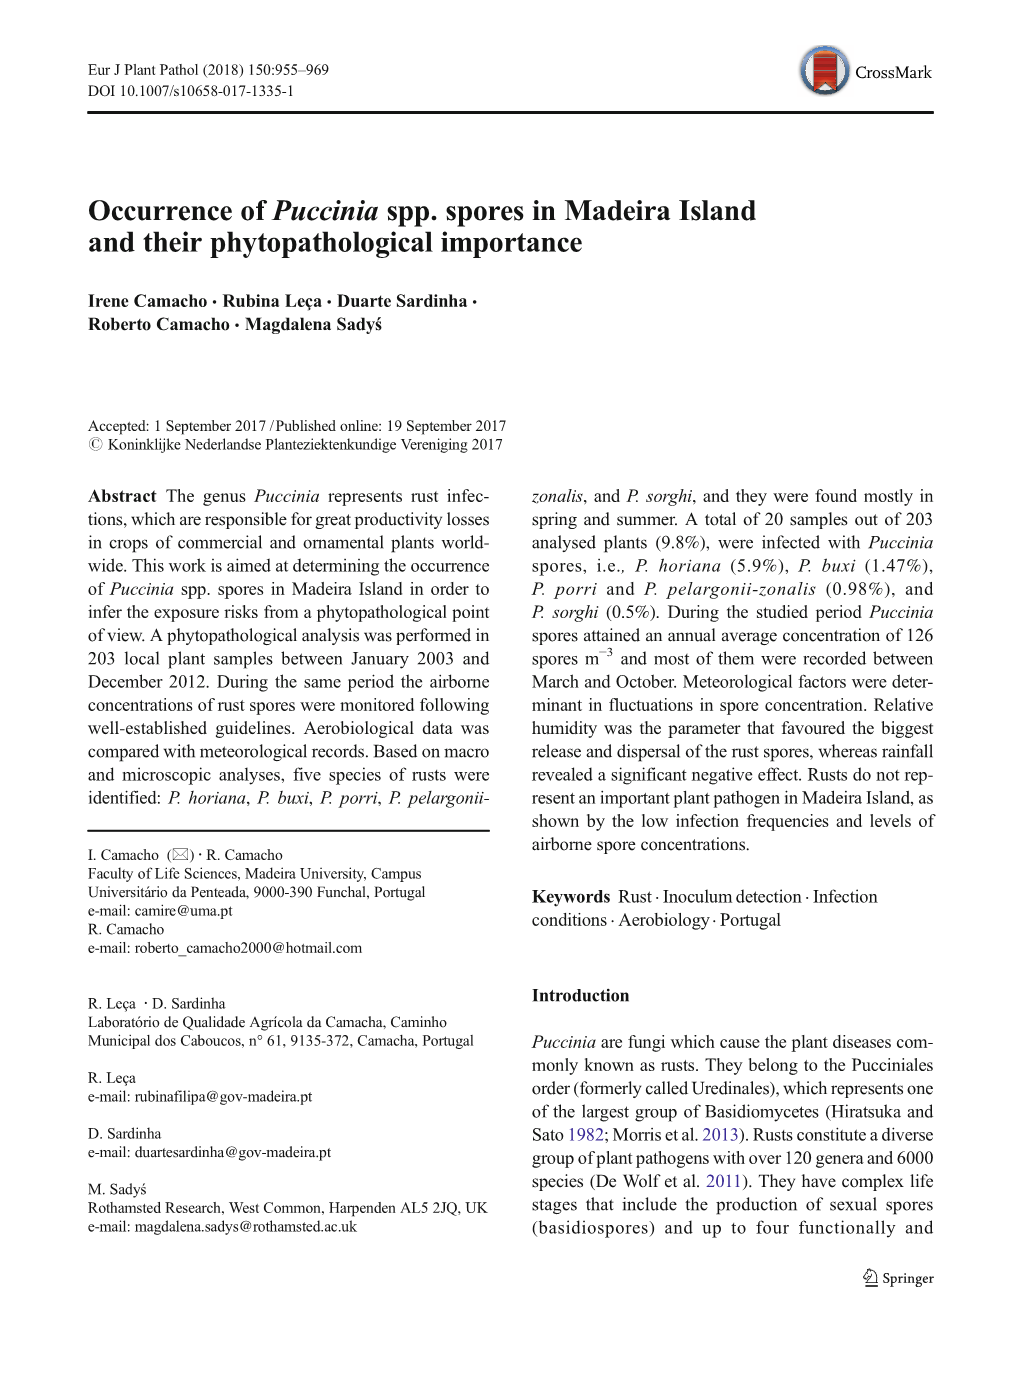 Occurrence of Puccinia Spp. Spores in Madeira Island and Their Phytopathological Importance